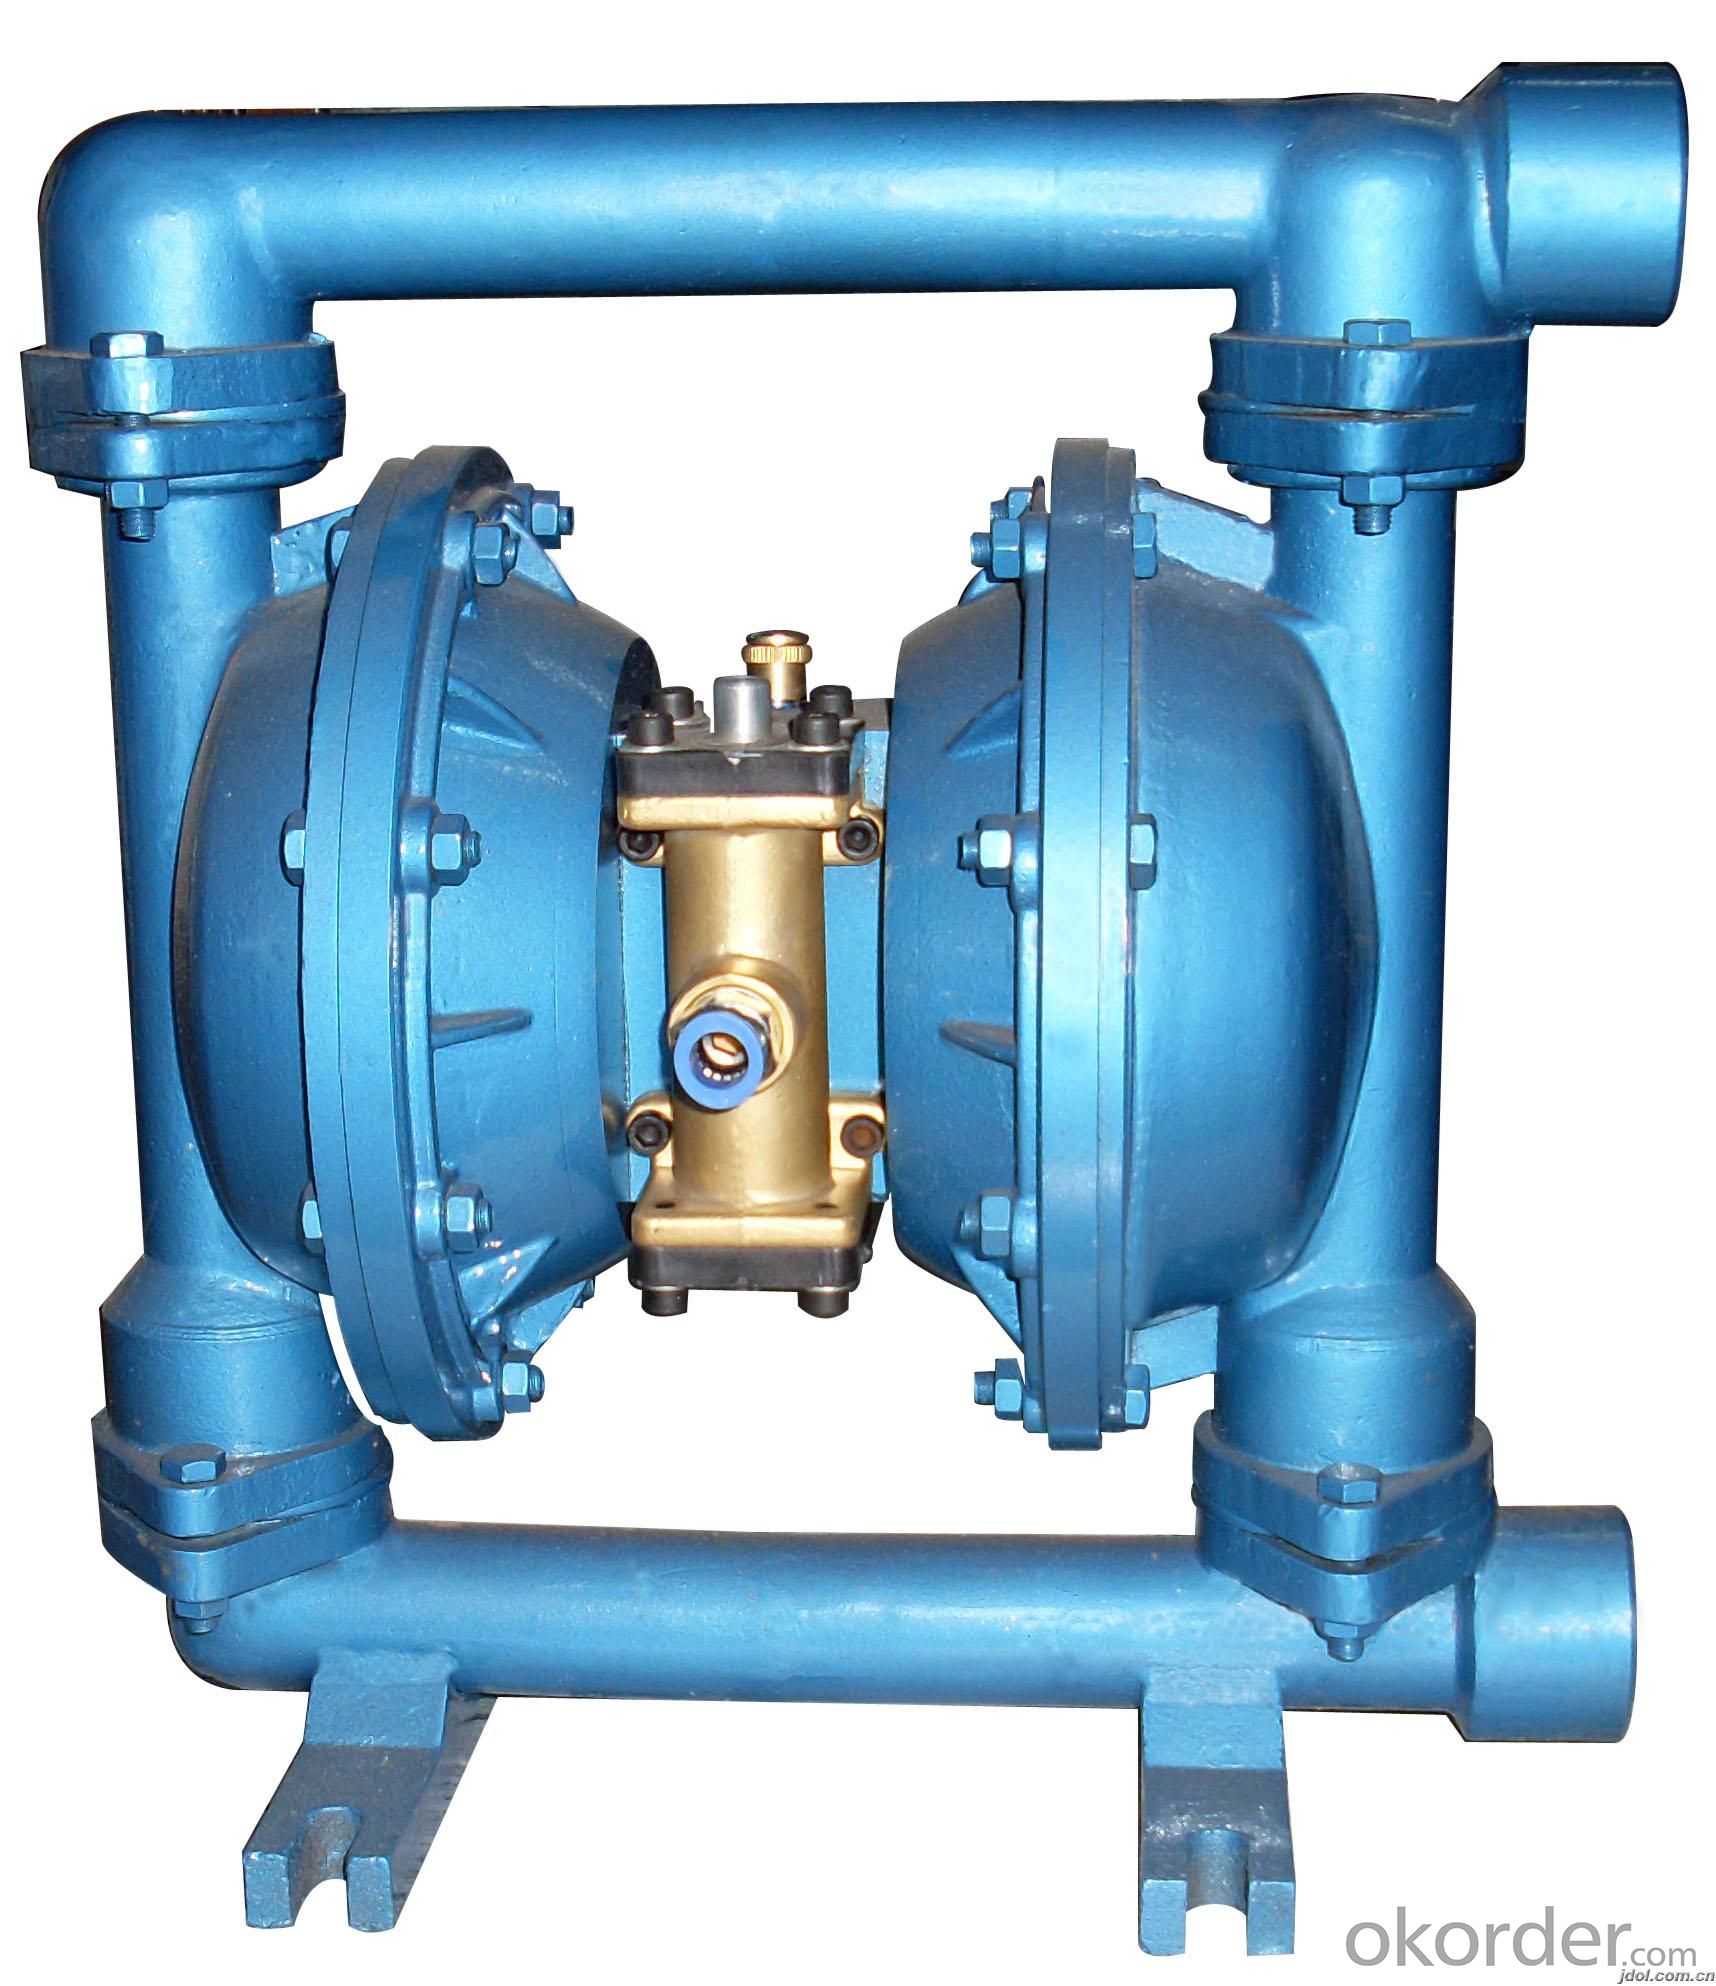 Diaphragm Pumps for Sales with High Quality